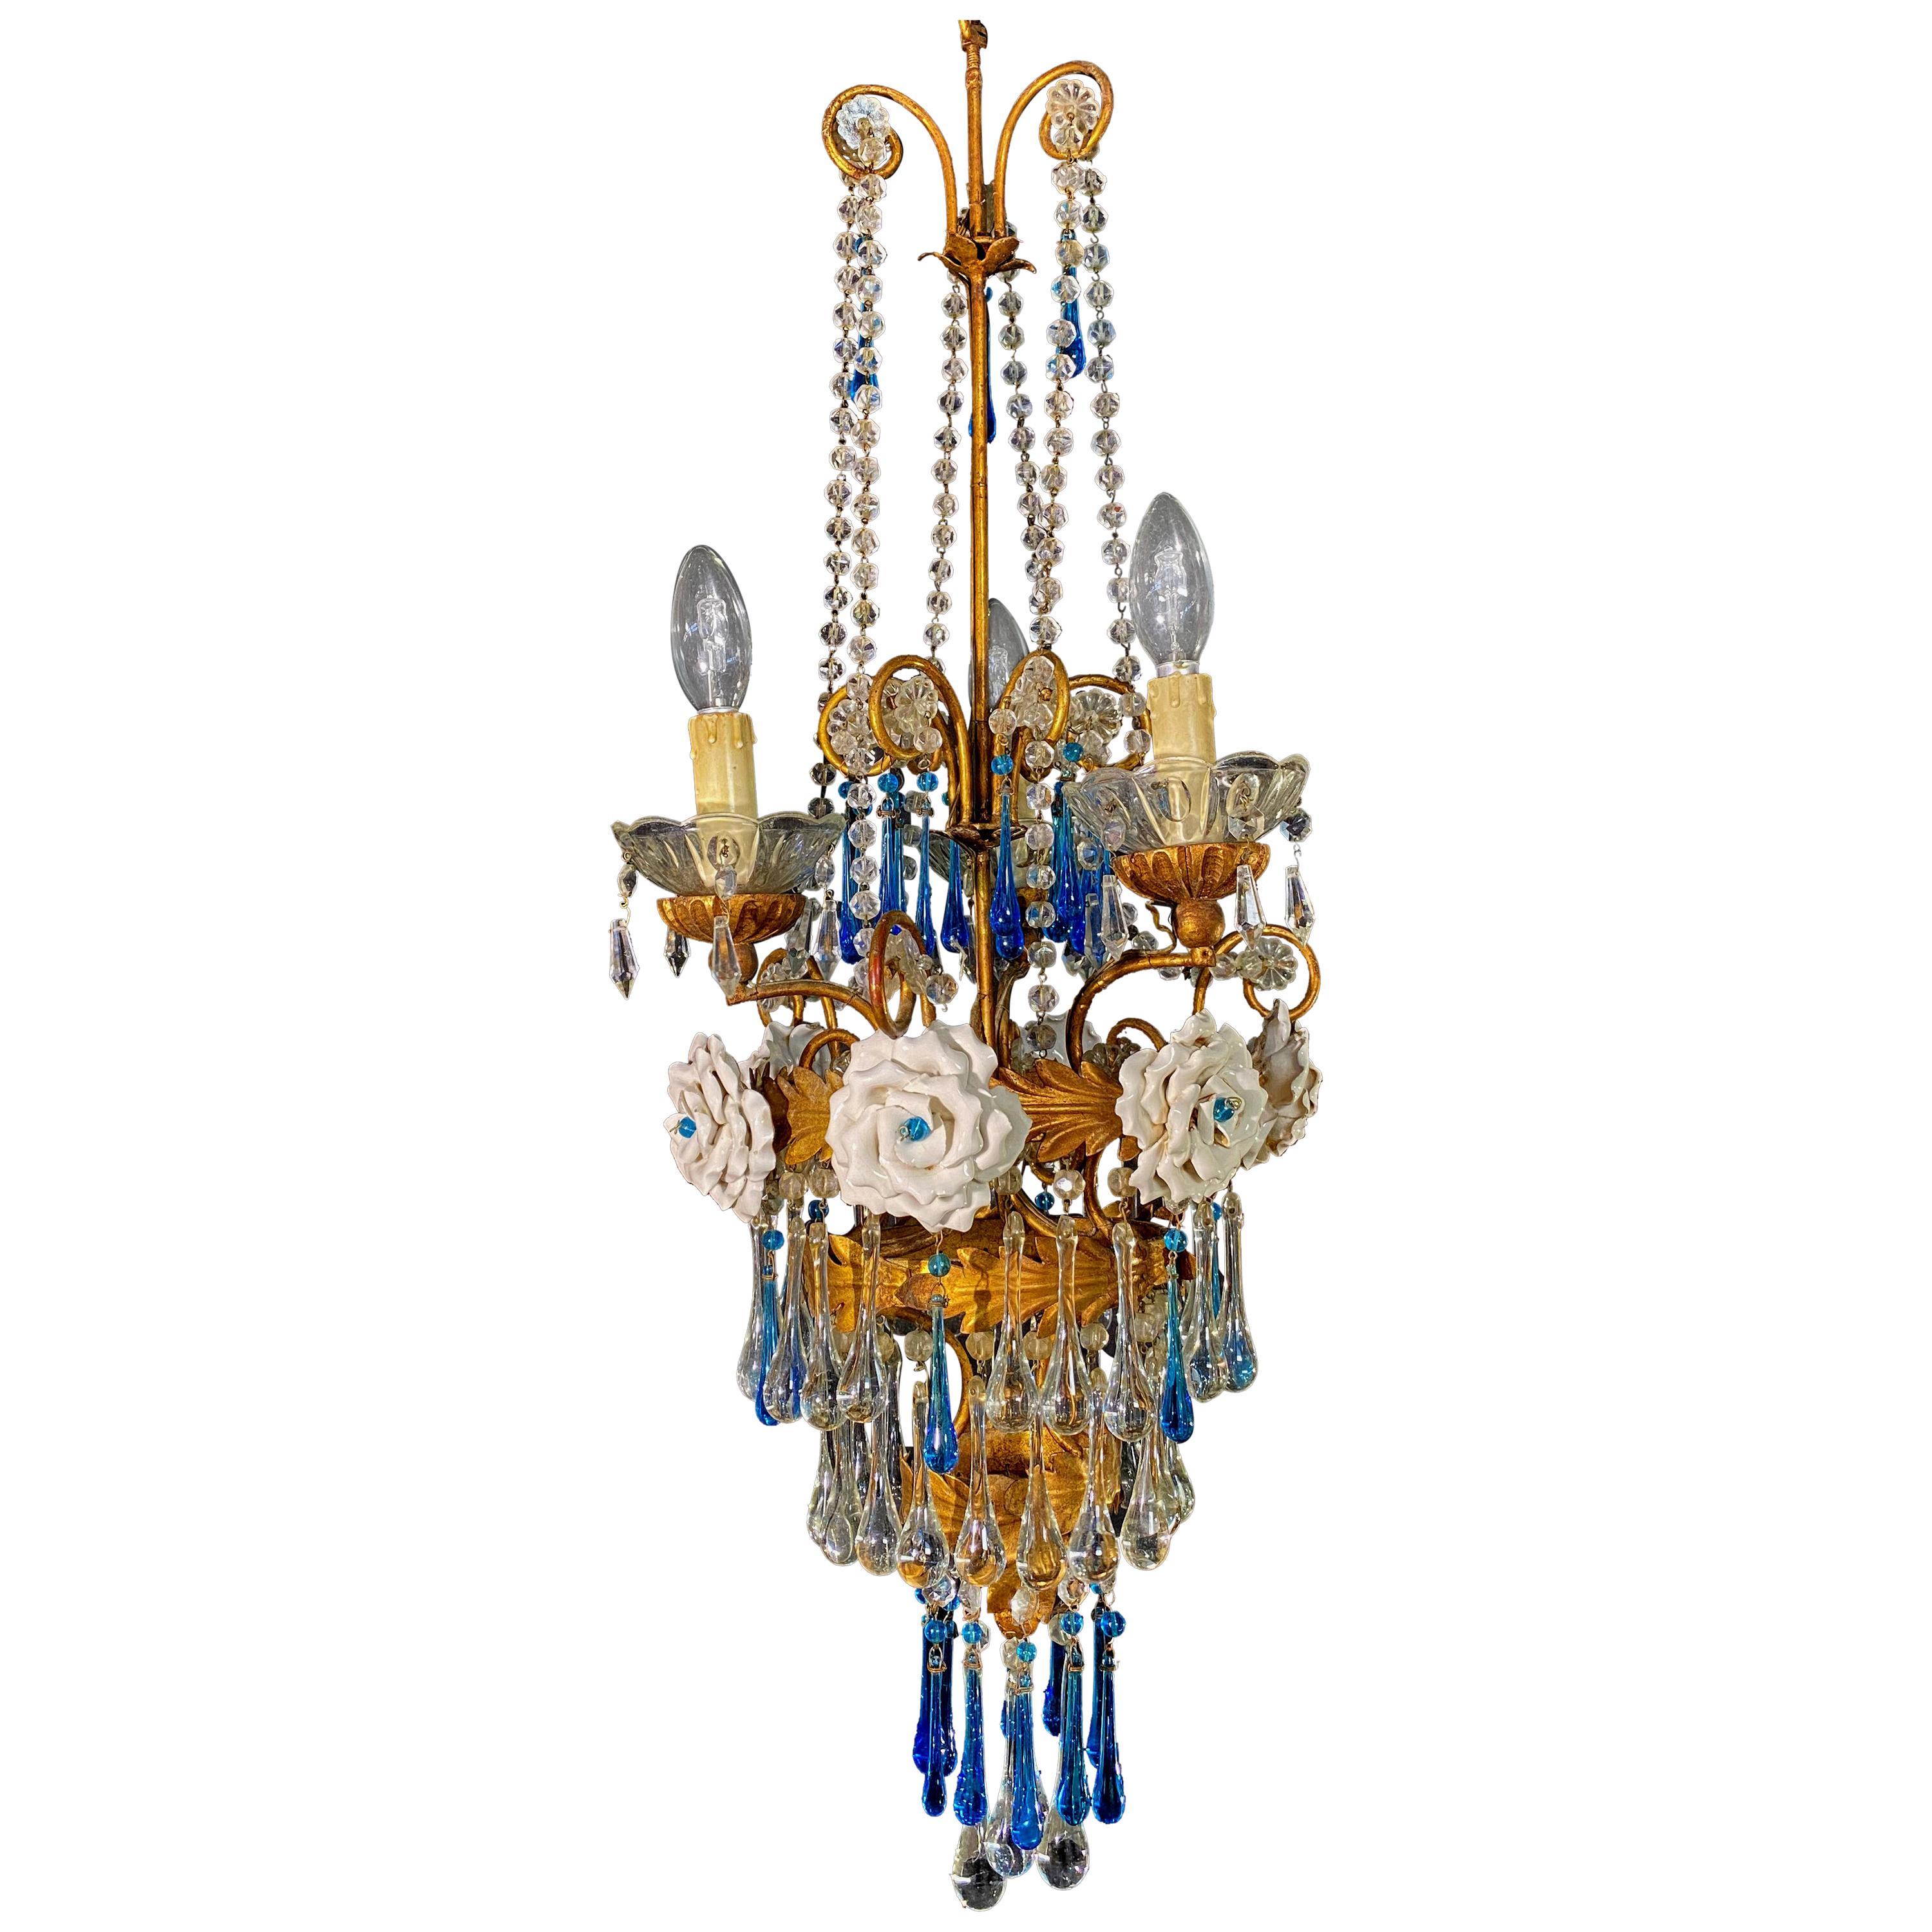 Lovely Chandelier with White Roses and Blue Drops, Murano, 1950s For Sale